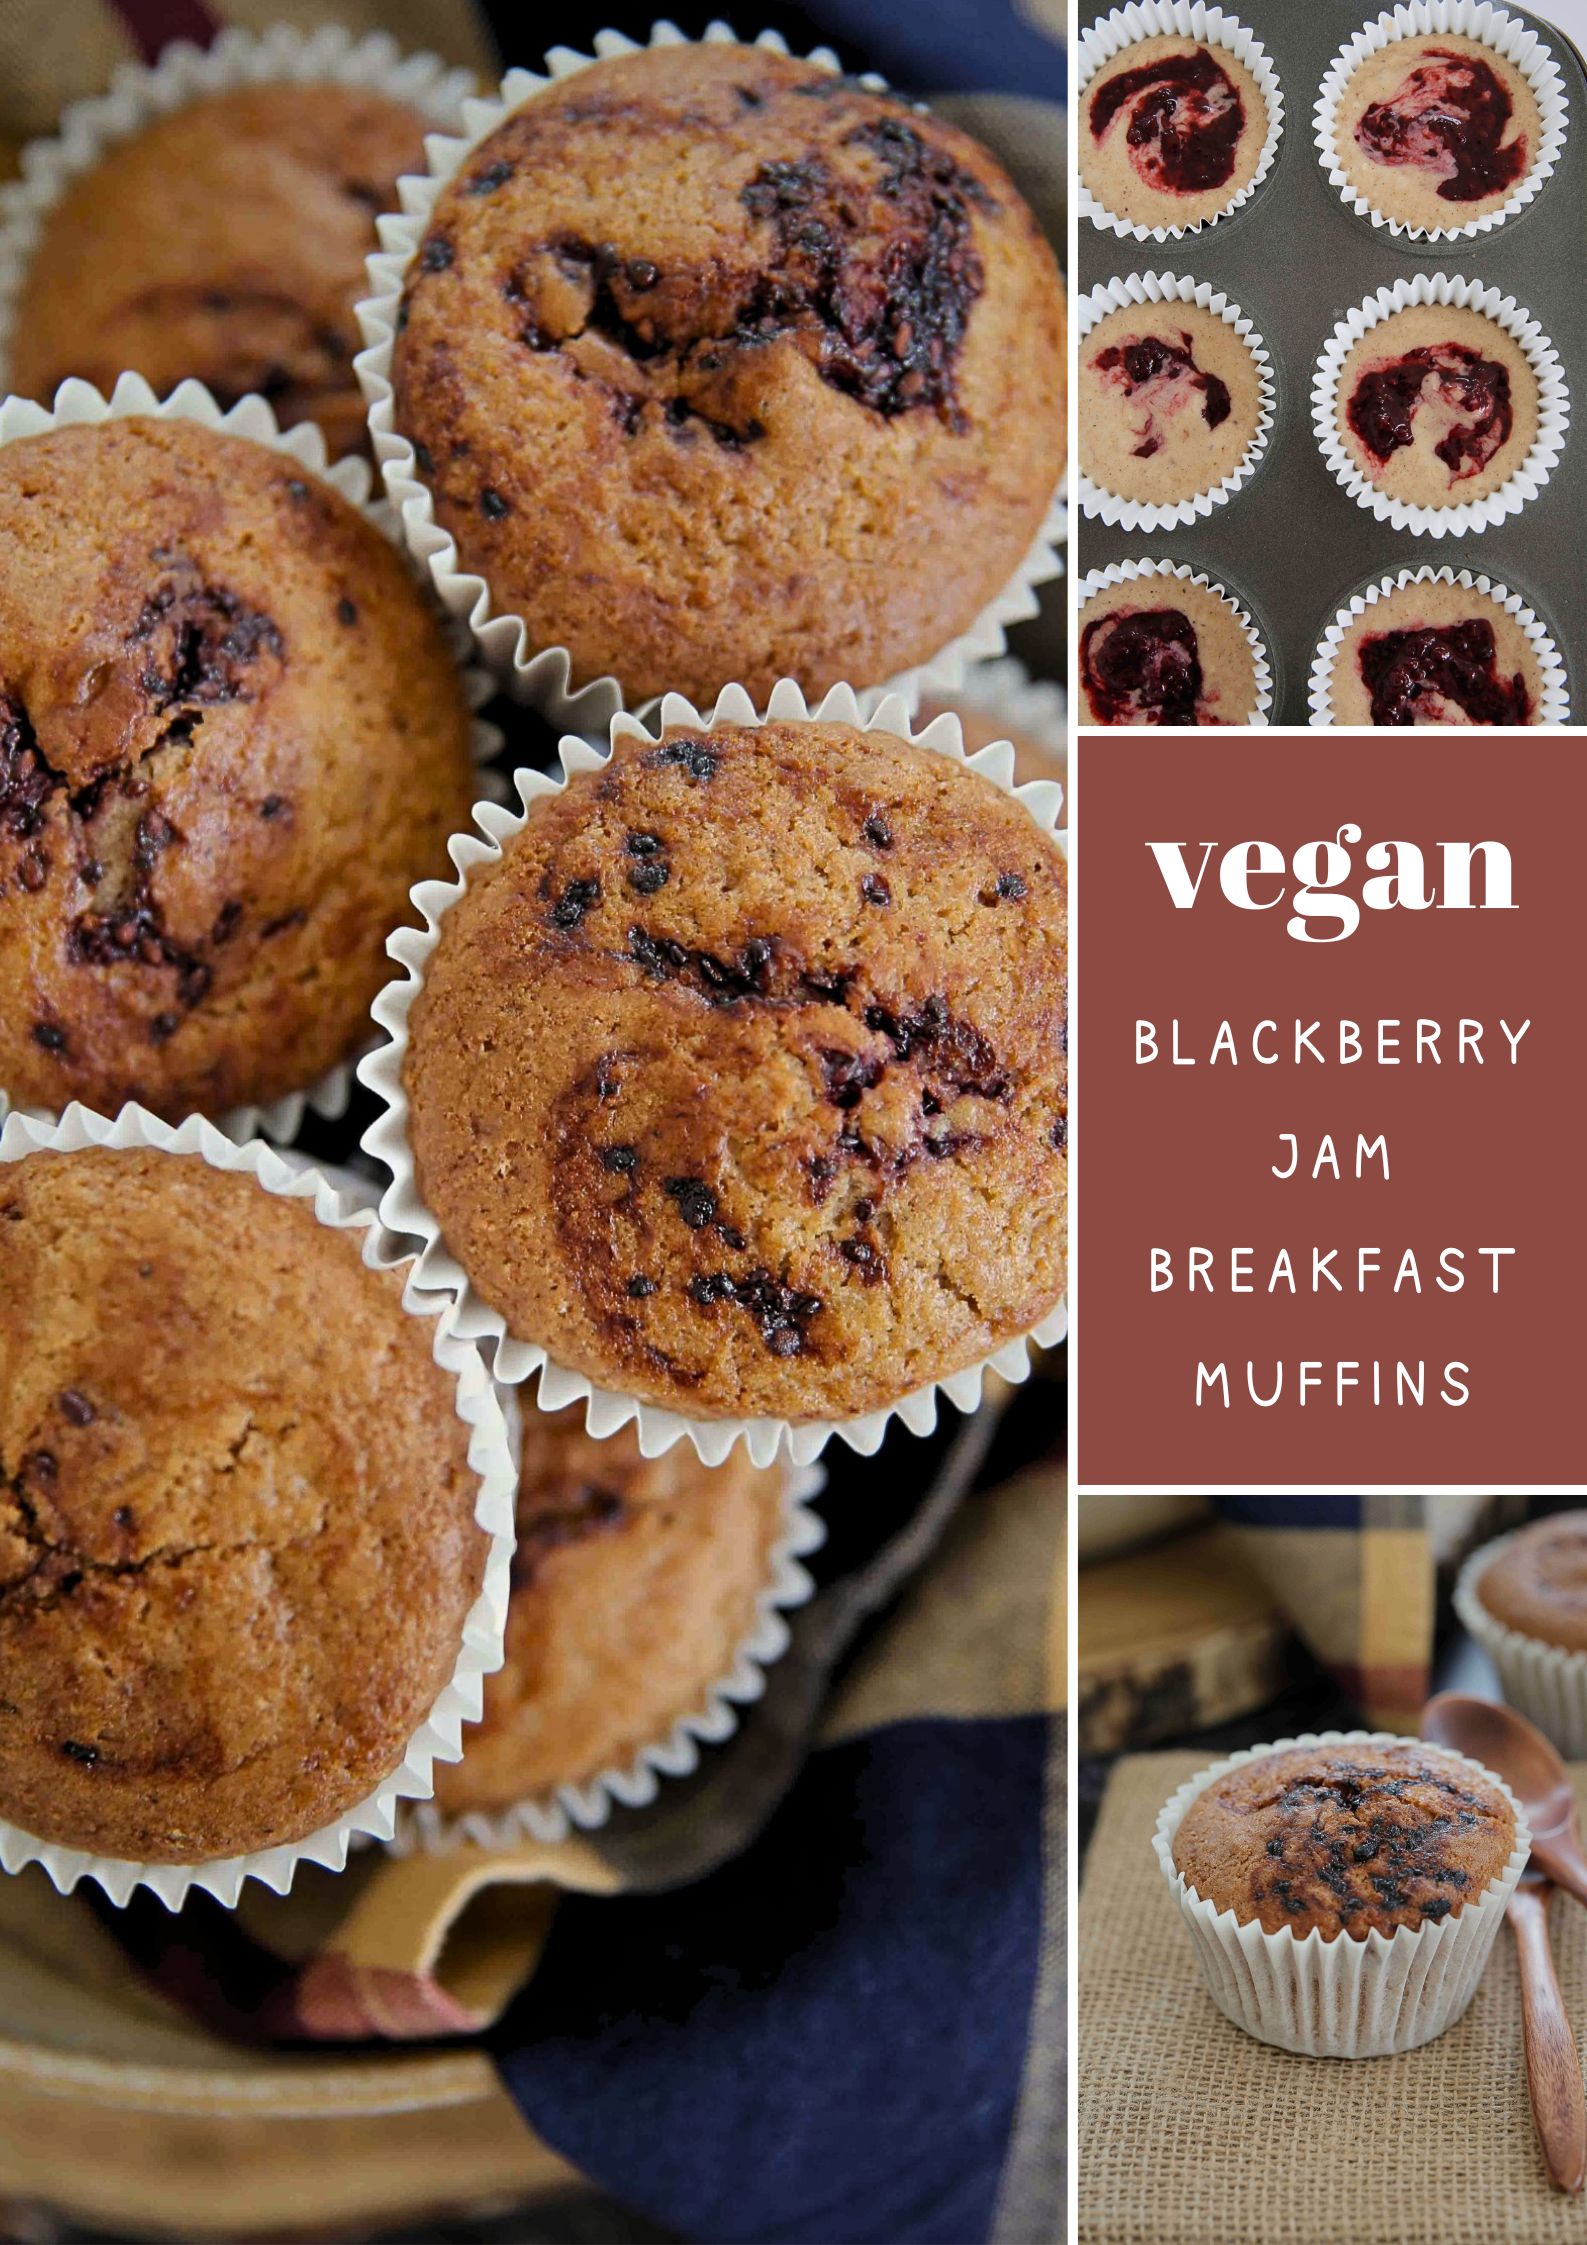 Fluffy, squidgy, lightly spiced bakery style breakfast muffins, swirled with the easiest homemade blackberry jam. Autumn cosiness in every bite! Recipe on thecookandhim.com #blackberrymuffins #veganmuffins #blackberryjam #lowsugarjam #breakfastmuffins #autumnrecipes #bakerystylemuffins